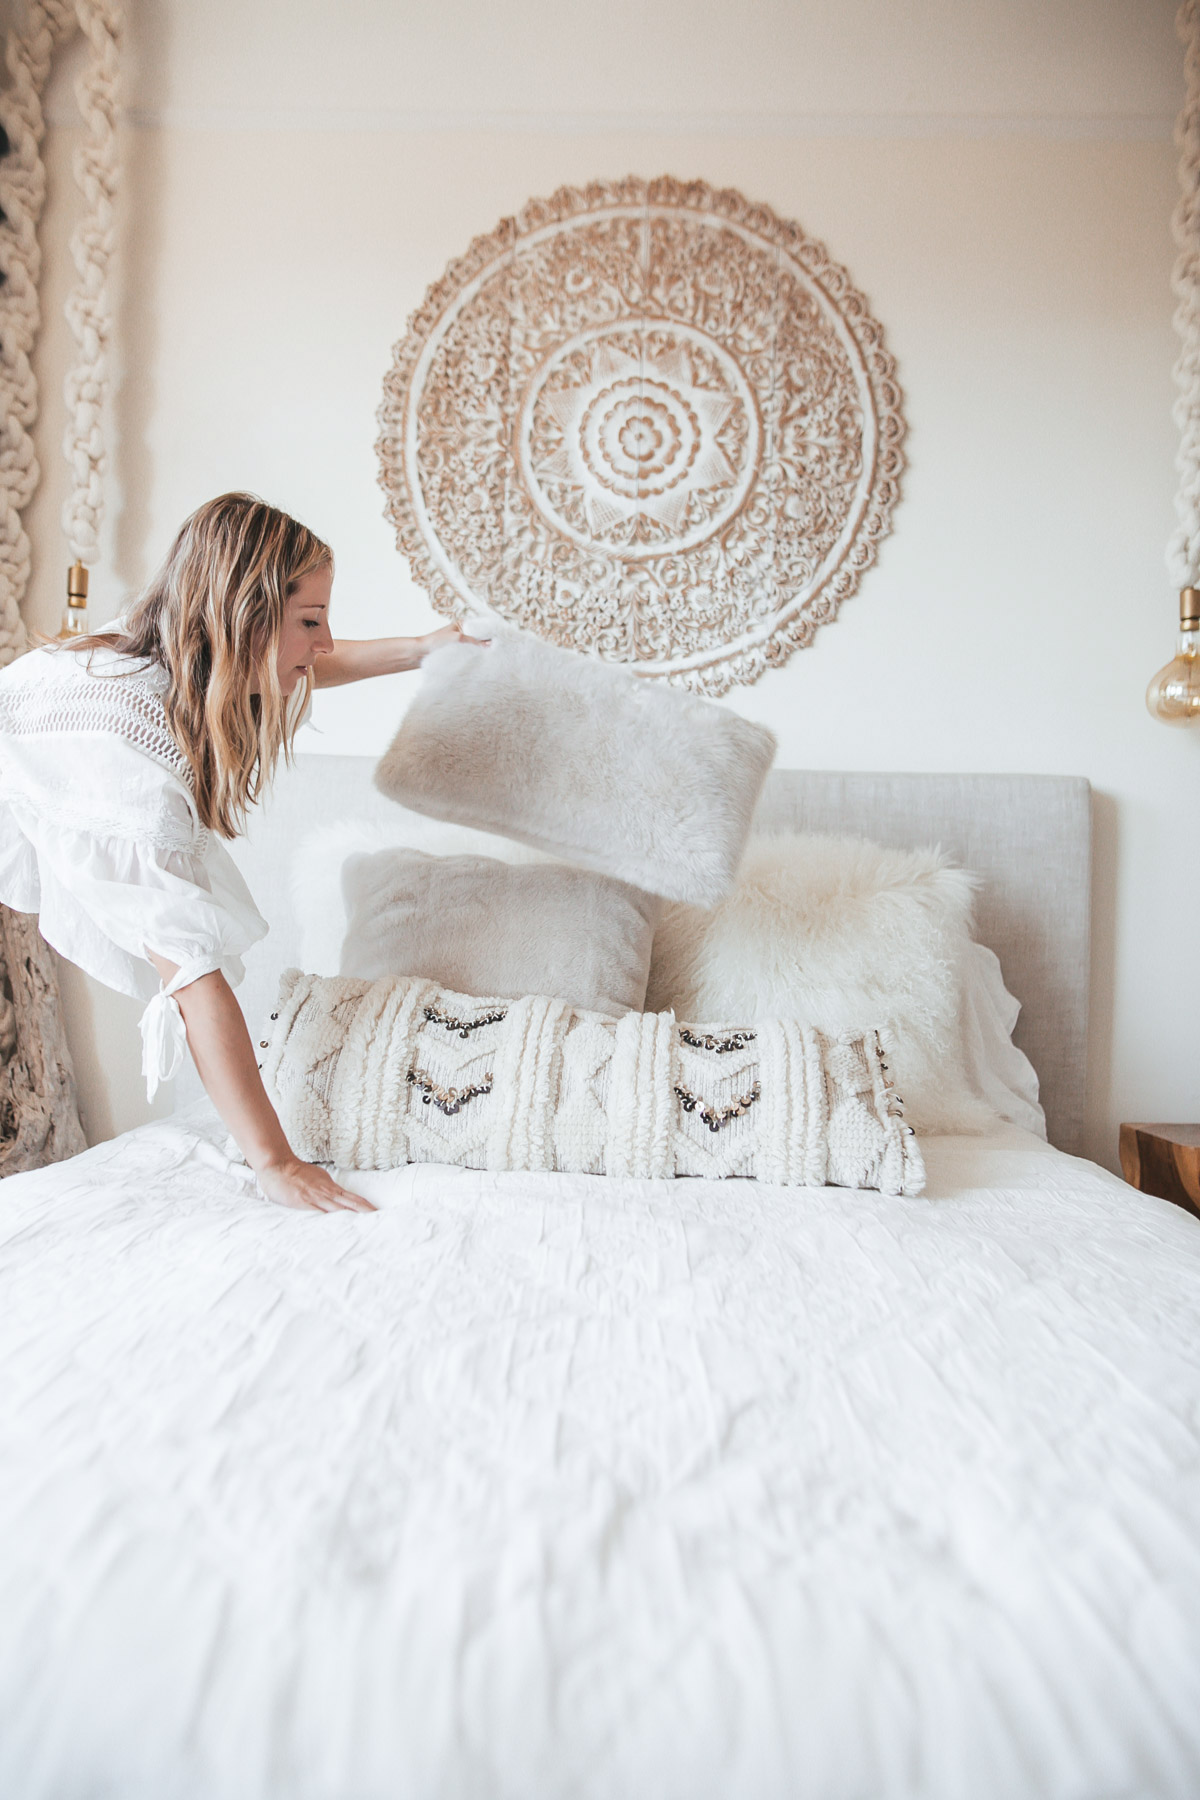 6 Ways to Make a Guest Room Comfortable